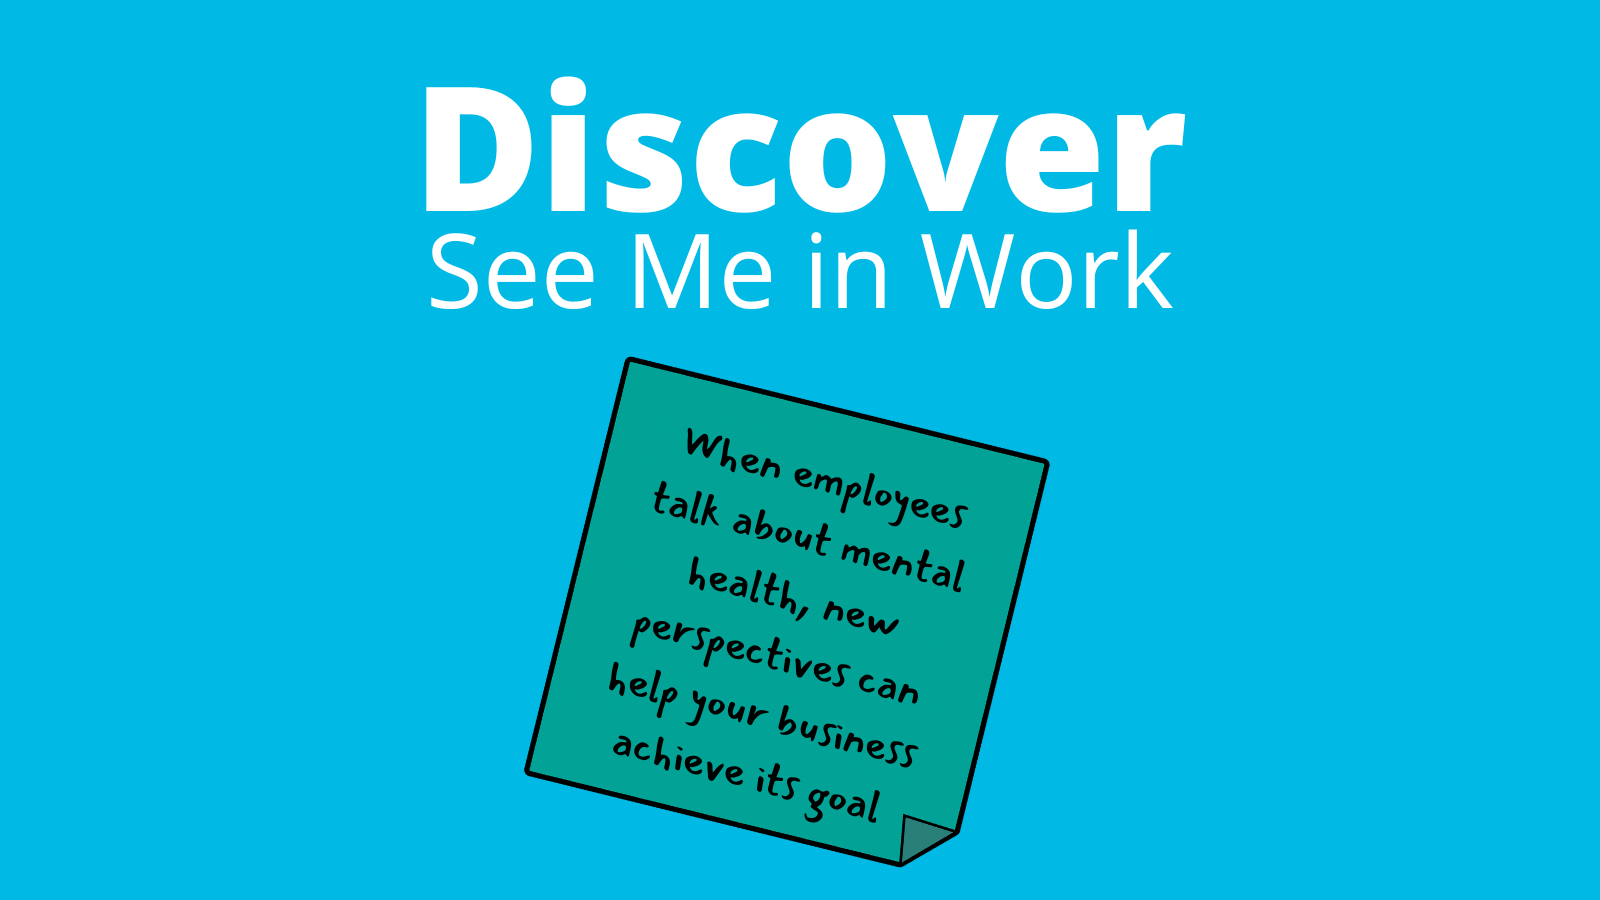 Text reads: "Discover See Me in Work" with the words "When employees talk about mental health, new perspectives can help your business achieve its goal" written on a sticky note